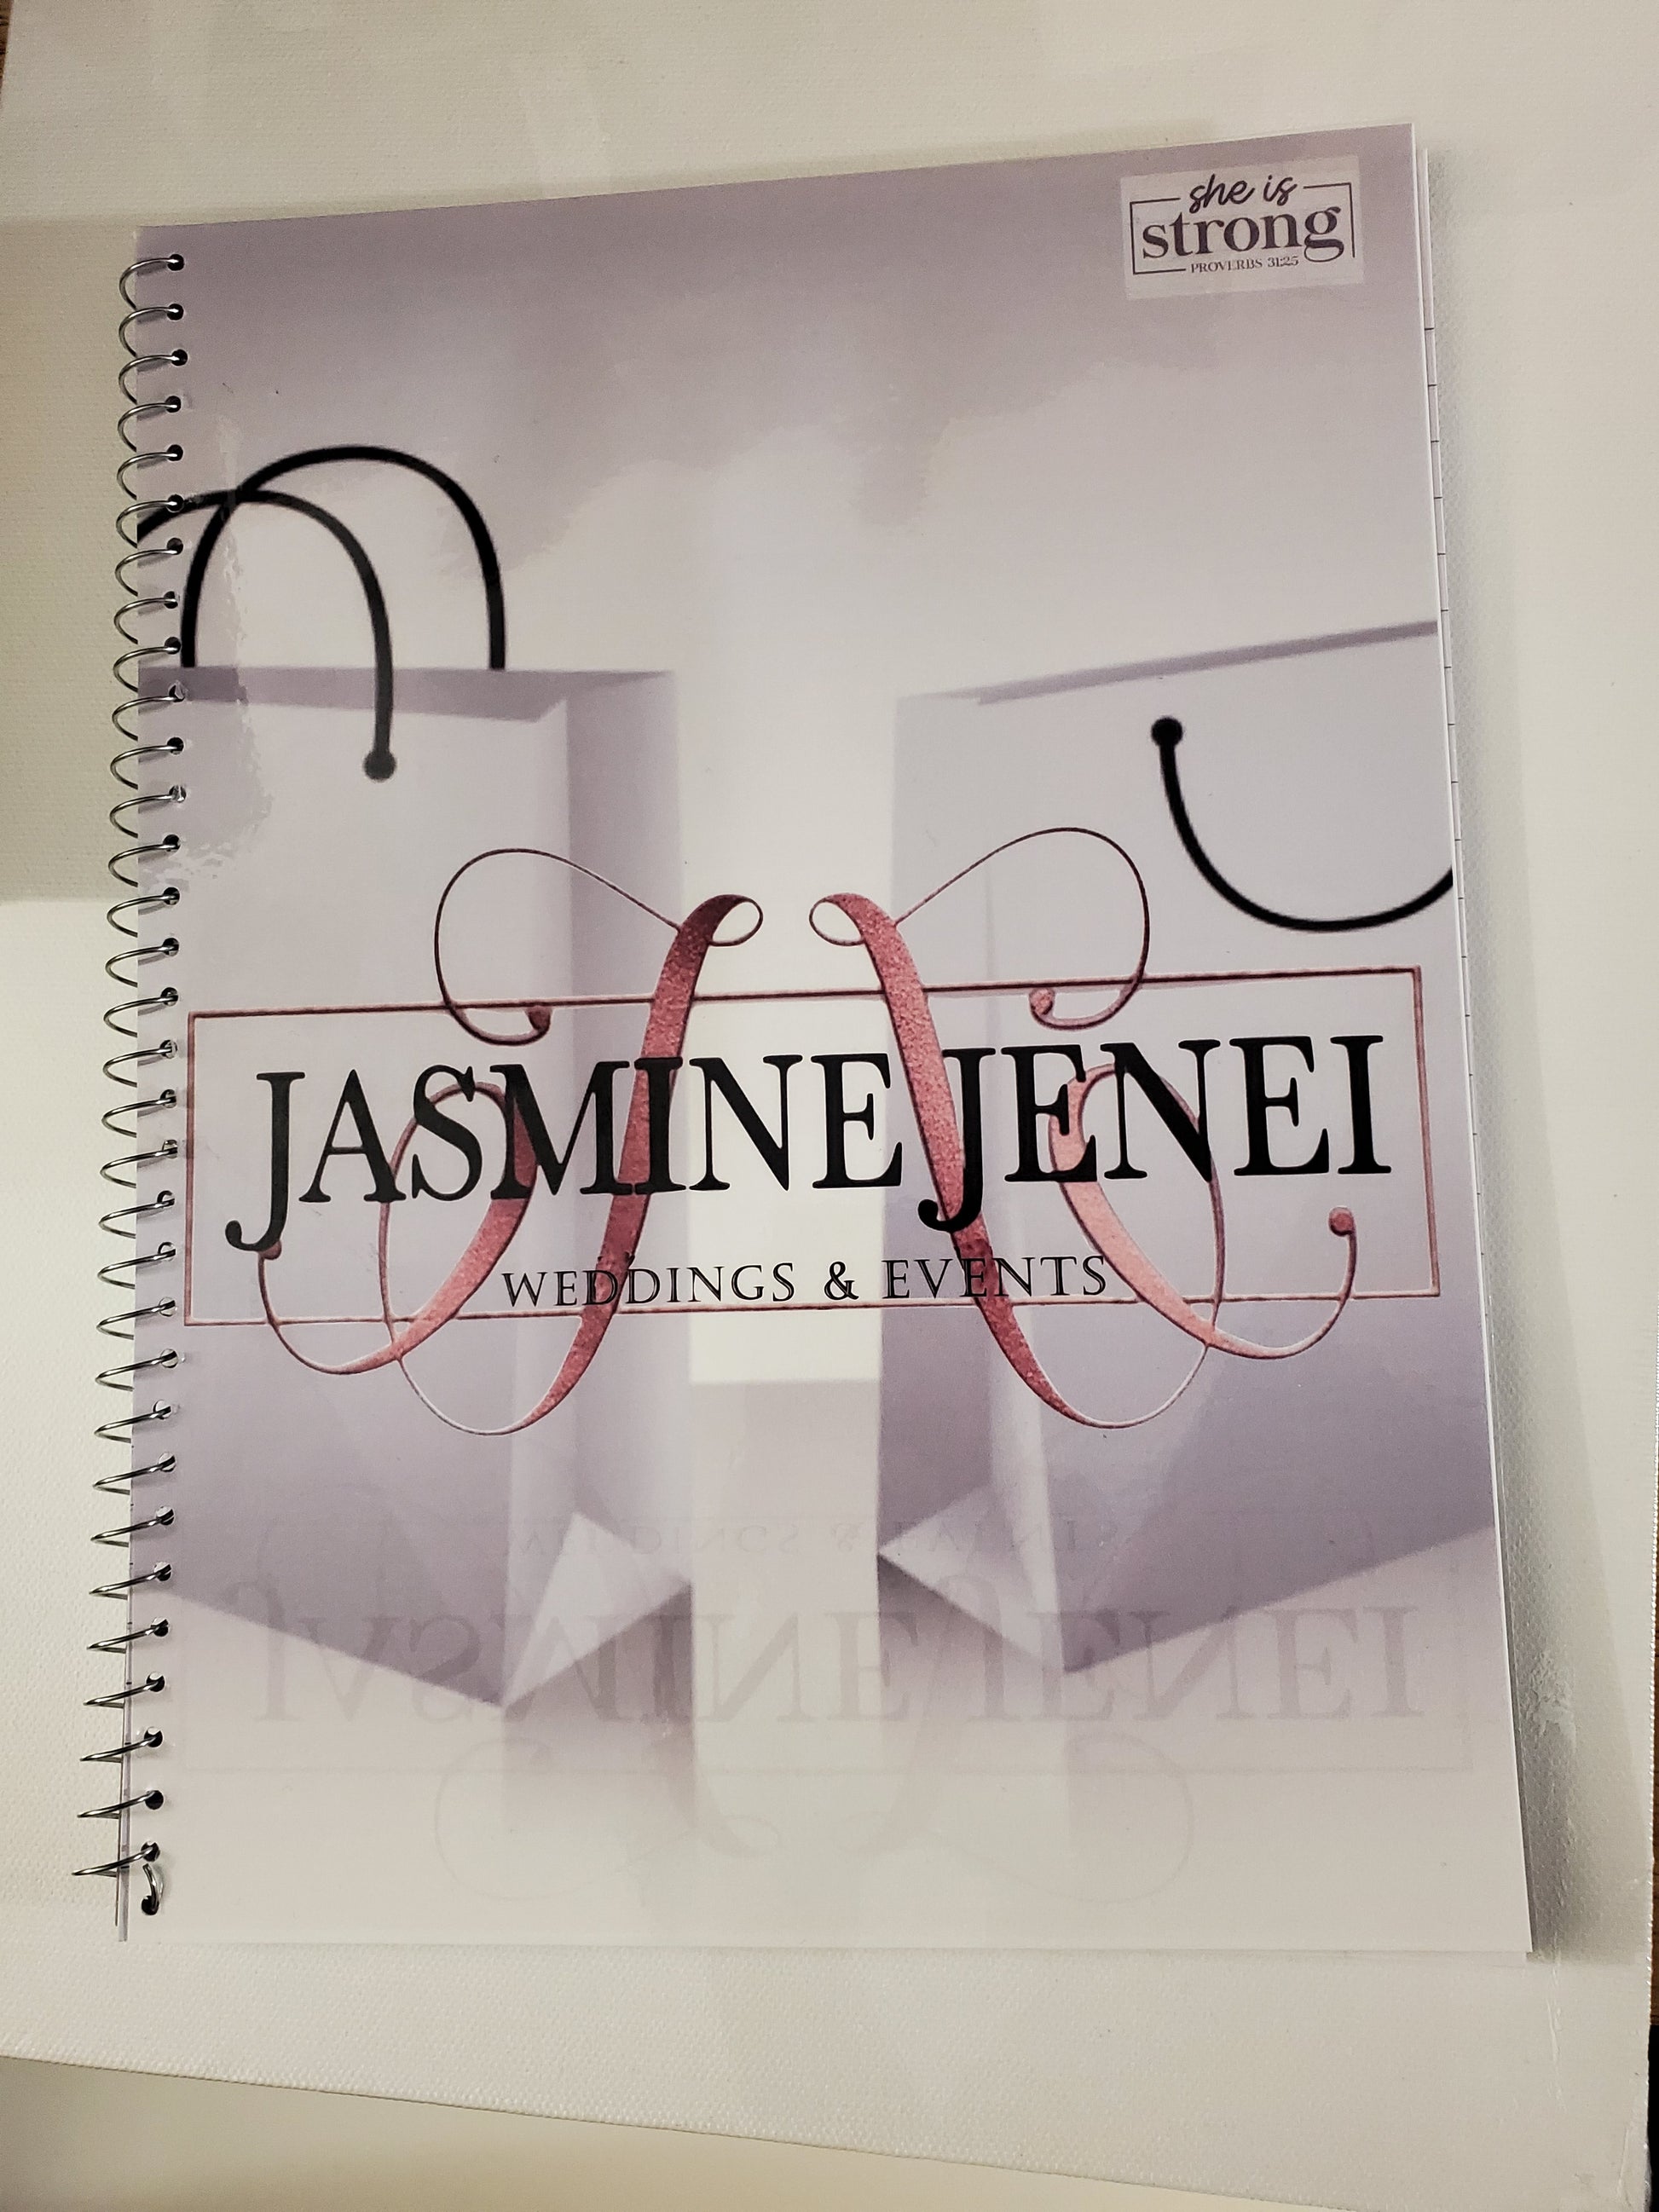 A spiral Notebook with the Business name in Fancy font that reads "Jasmine Jenei Wedding & Events"